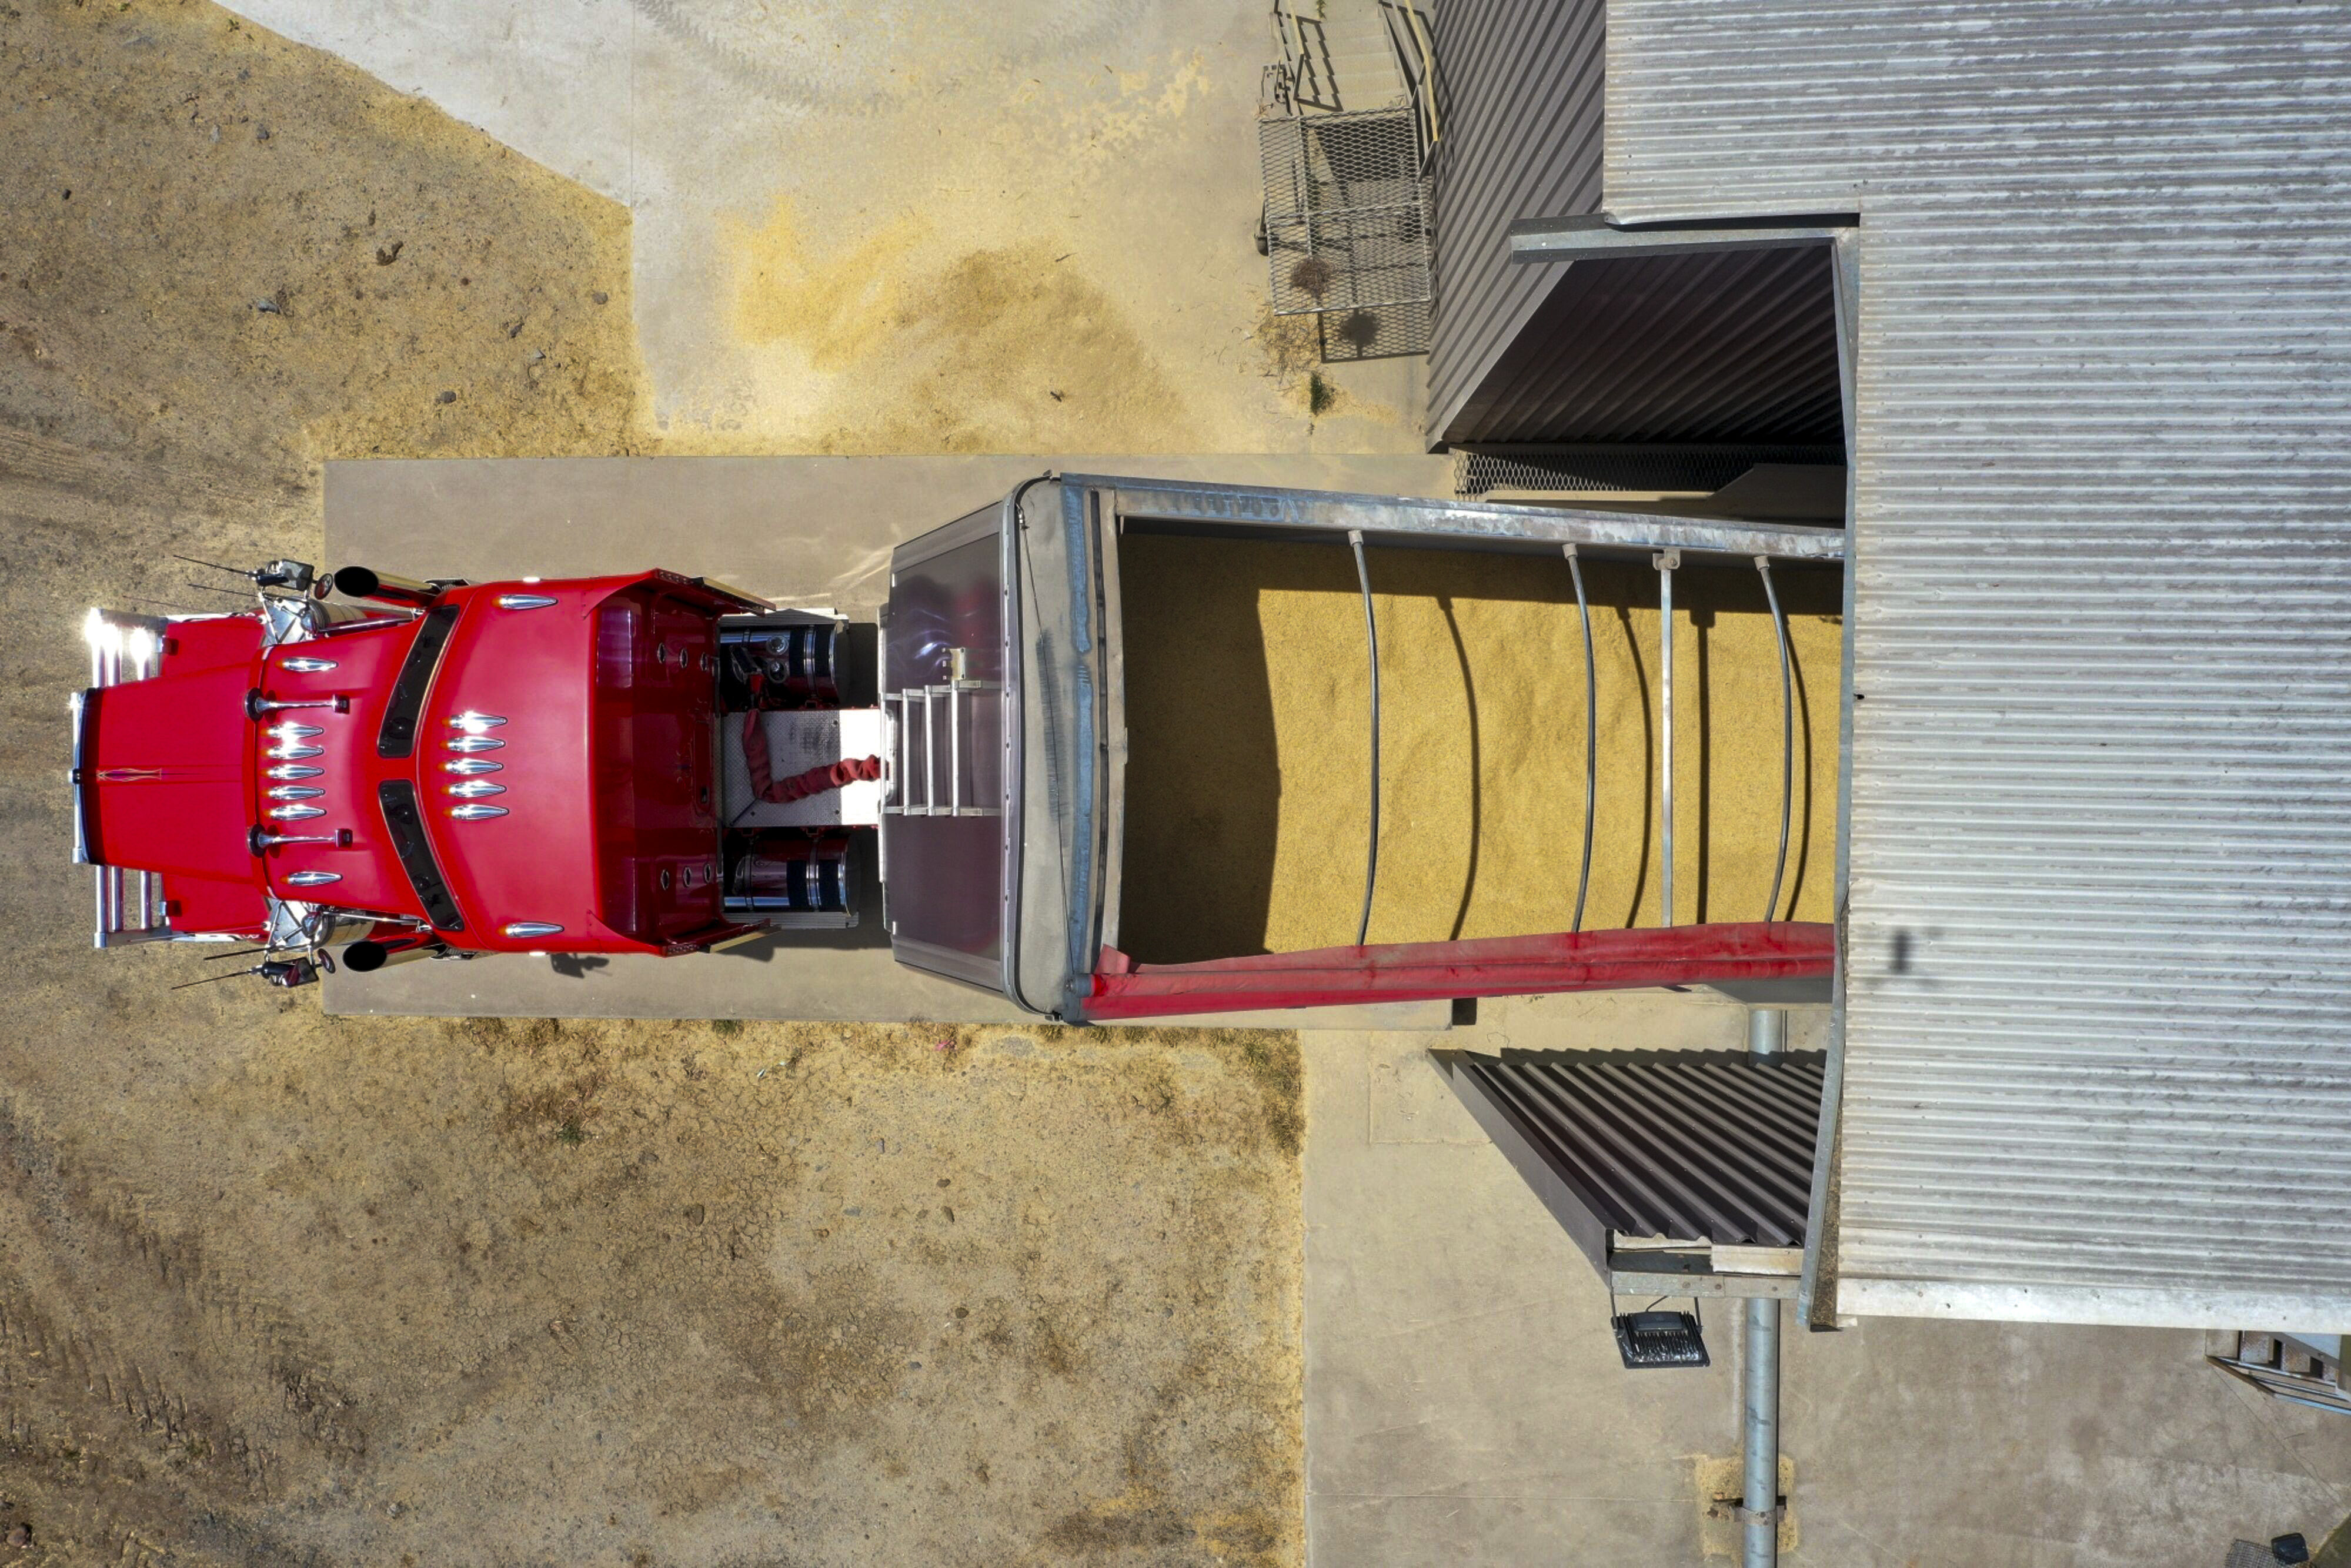 A truck delivers barley to a silo feeder in Australia. China is lifting barley tariffs that have forced Australian exporters to seek other destinations. Photo: Bloomberg